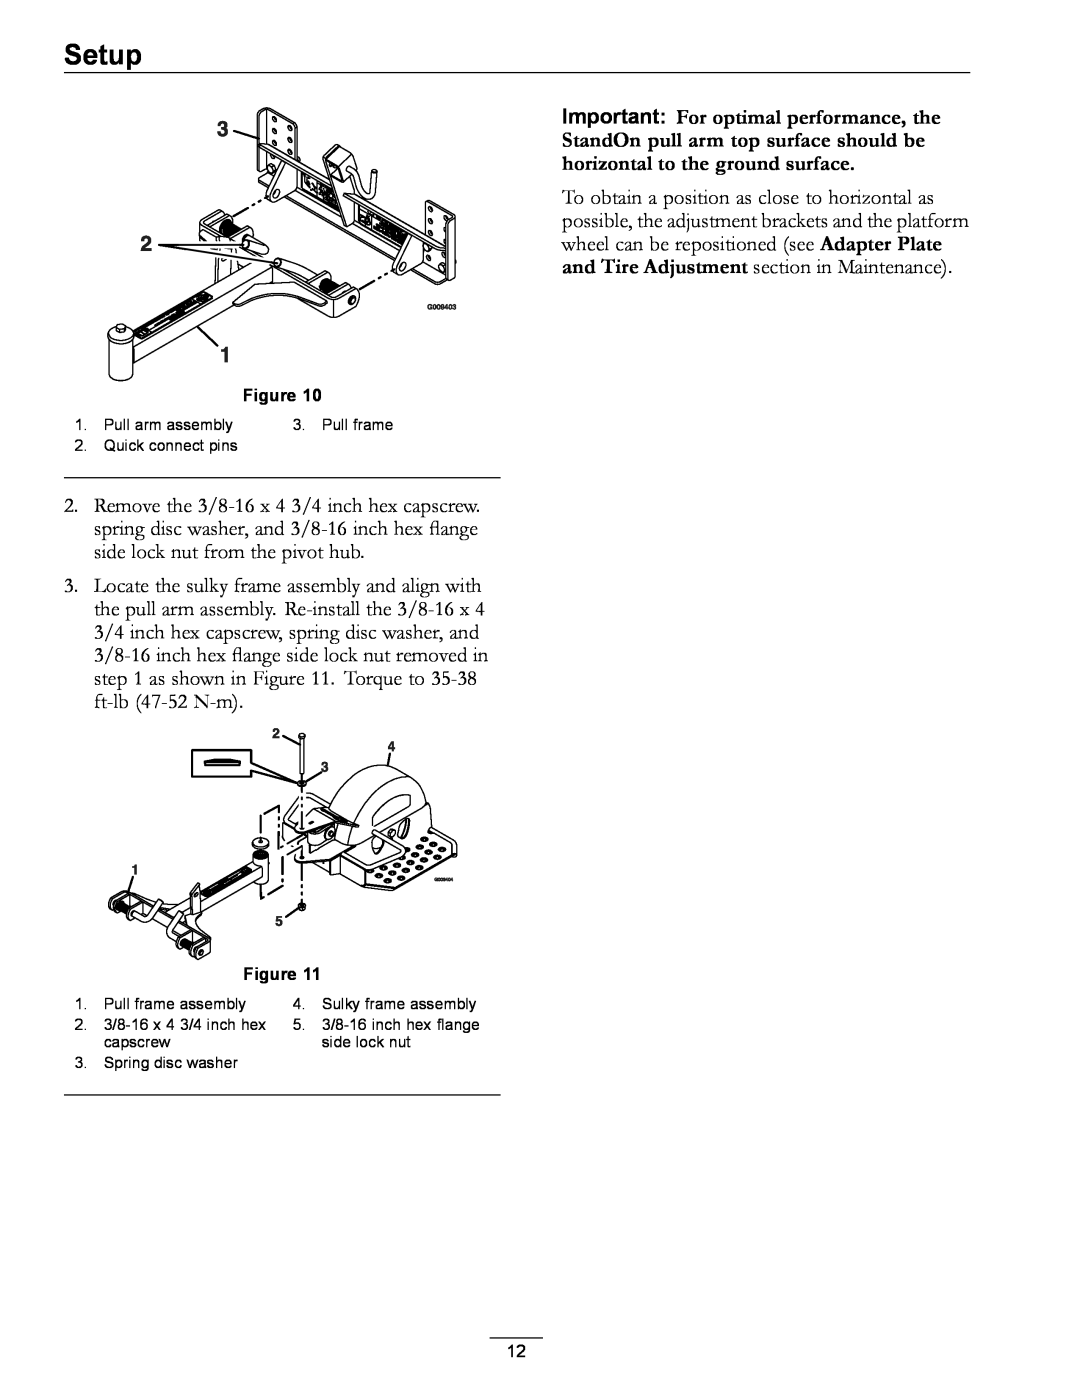 Exmark 4500-435 manual Setup, Pull arm assembly, Pull frame, Quick connect pins, Spring disc washer 